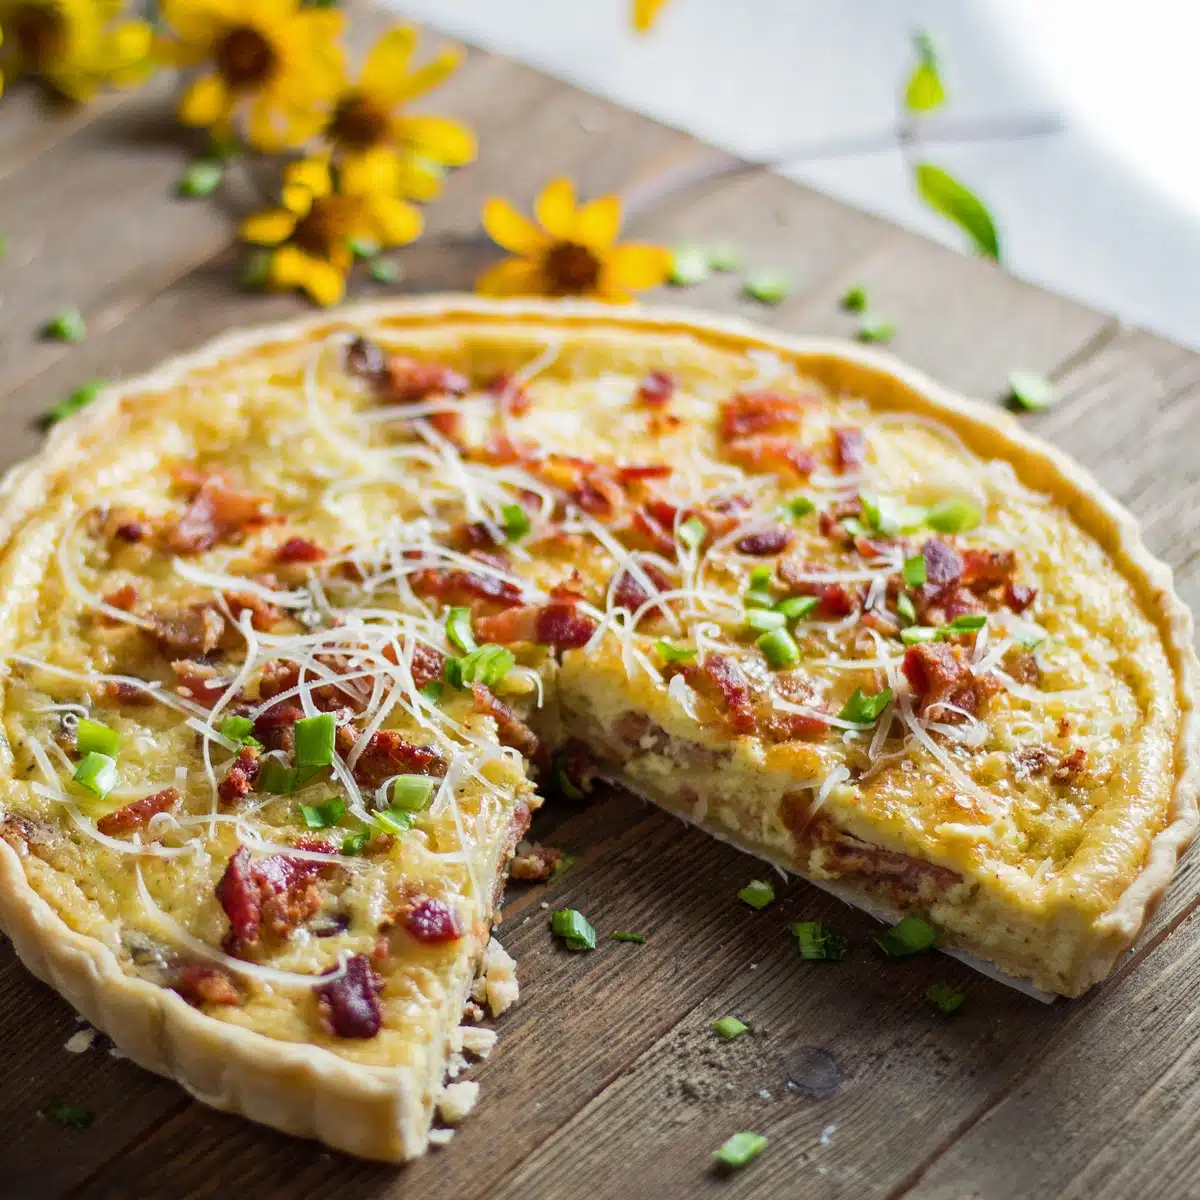 What to serve with quiche when sliced and ready to enjoy.